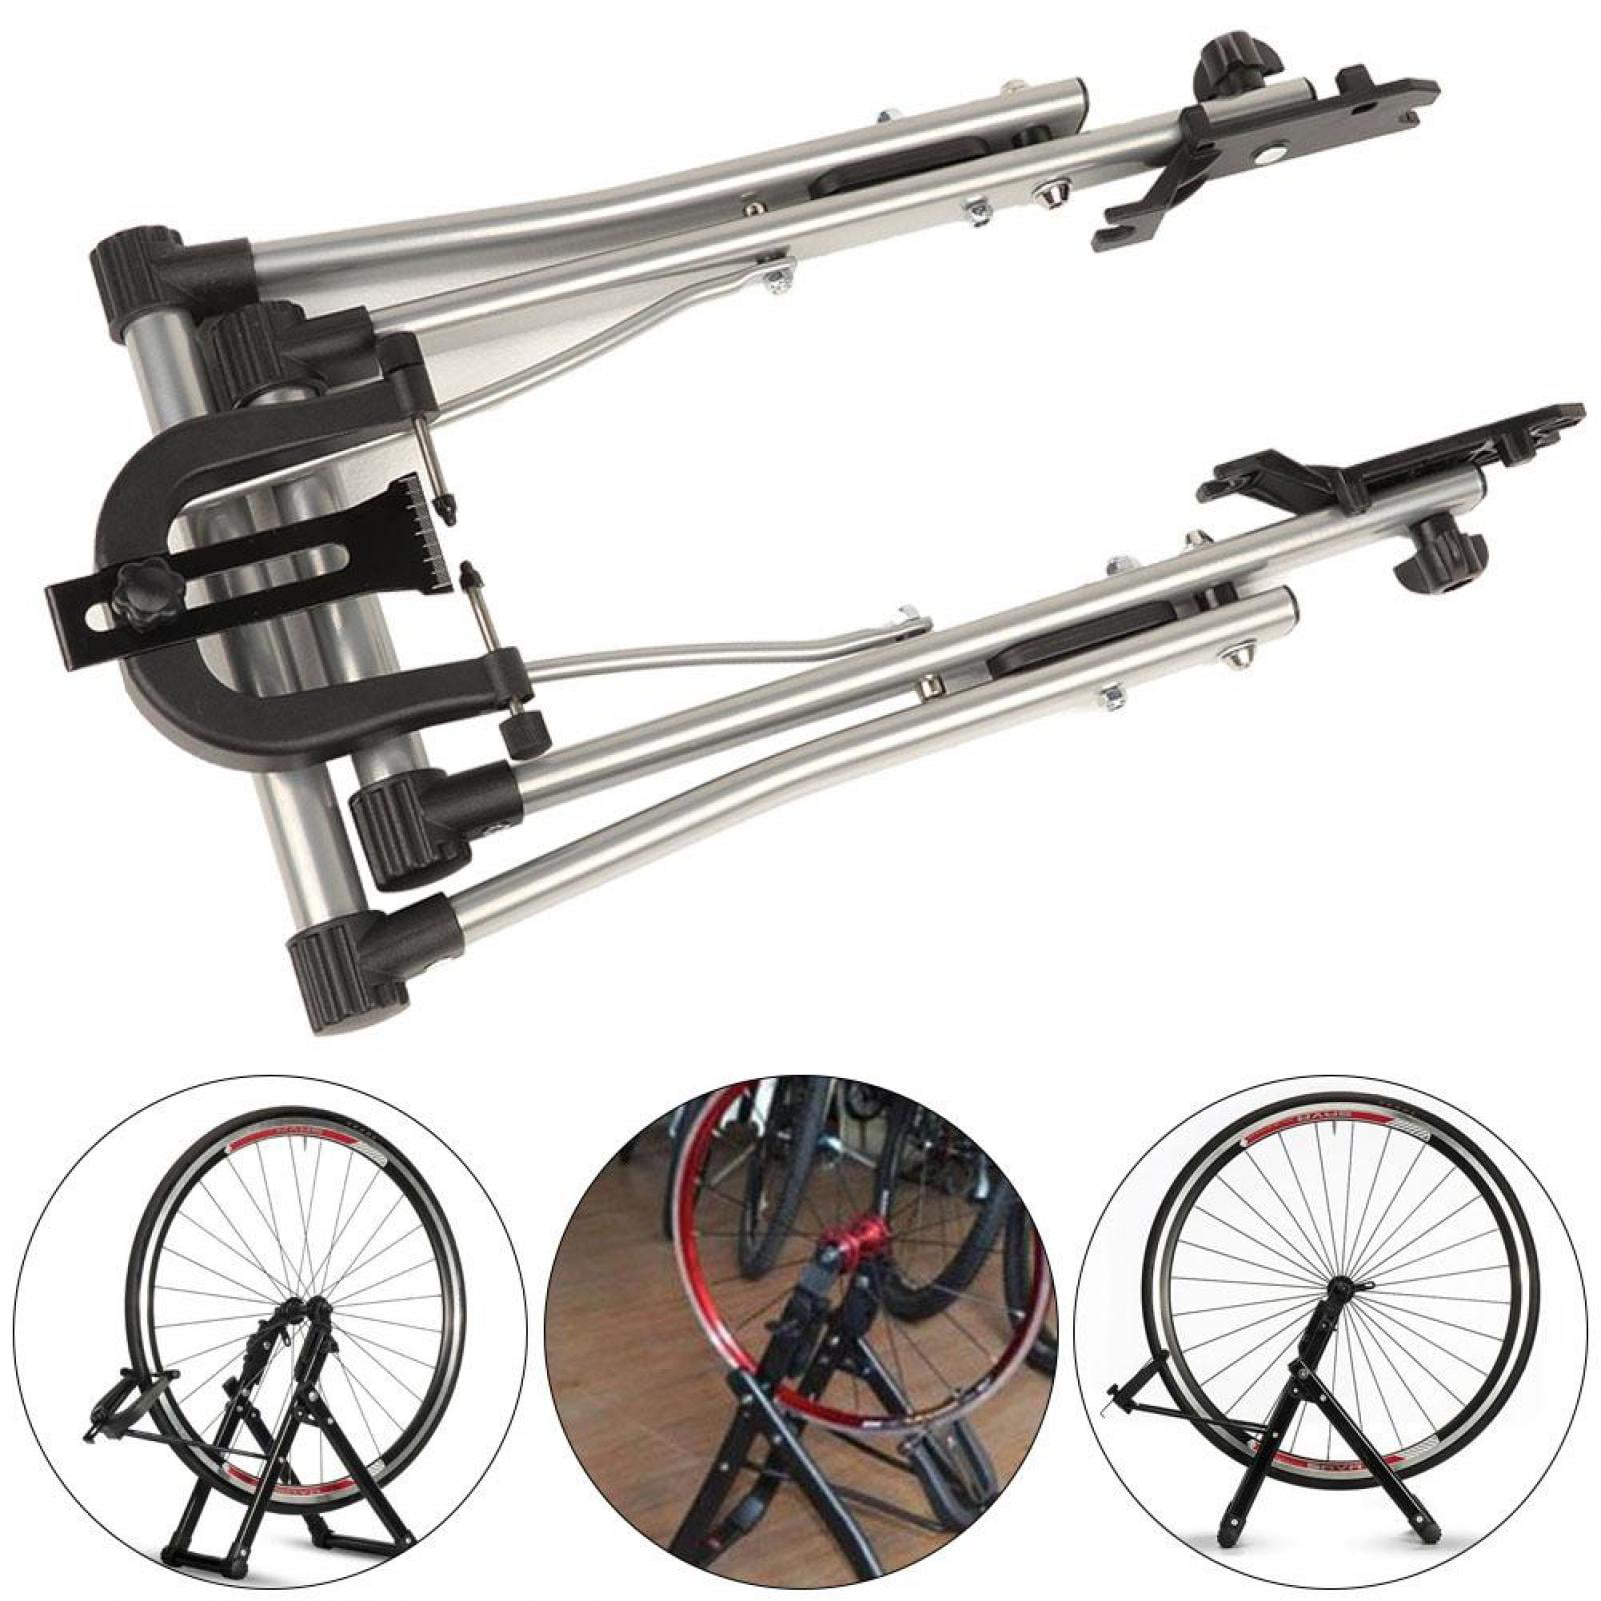 Aluminum Alloy Bicycle Wheel Maintenance Durable Bike Cycling Accessory Parts for 100mm Front Flower Drum Drive Bicycle Wheel Truing Stand 